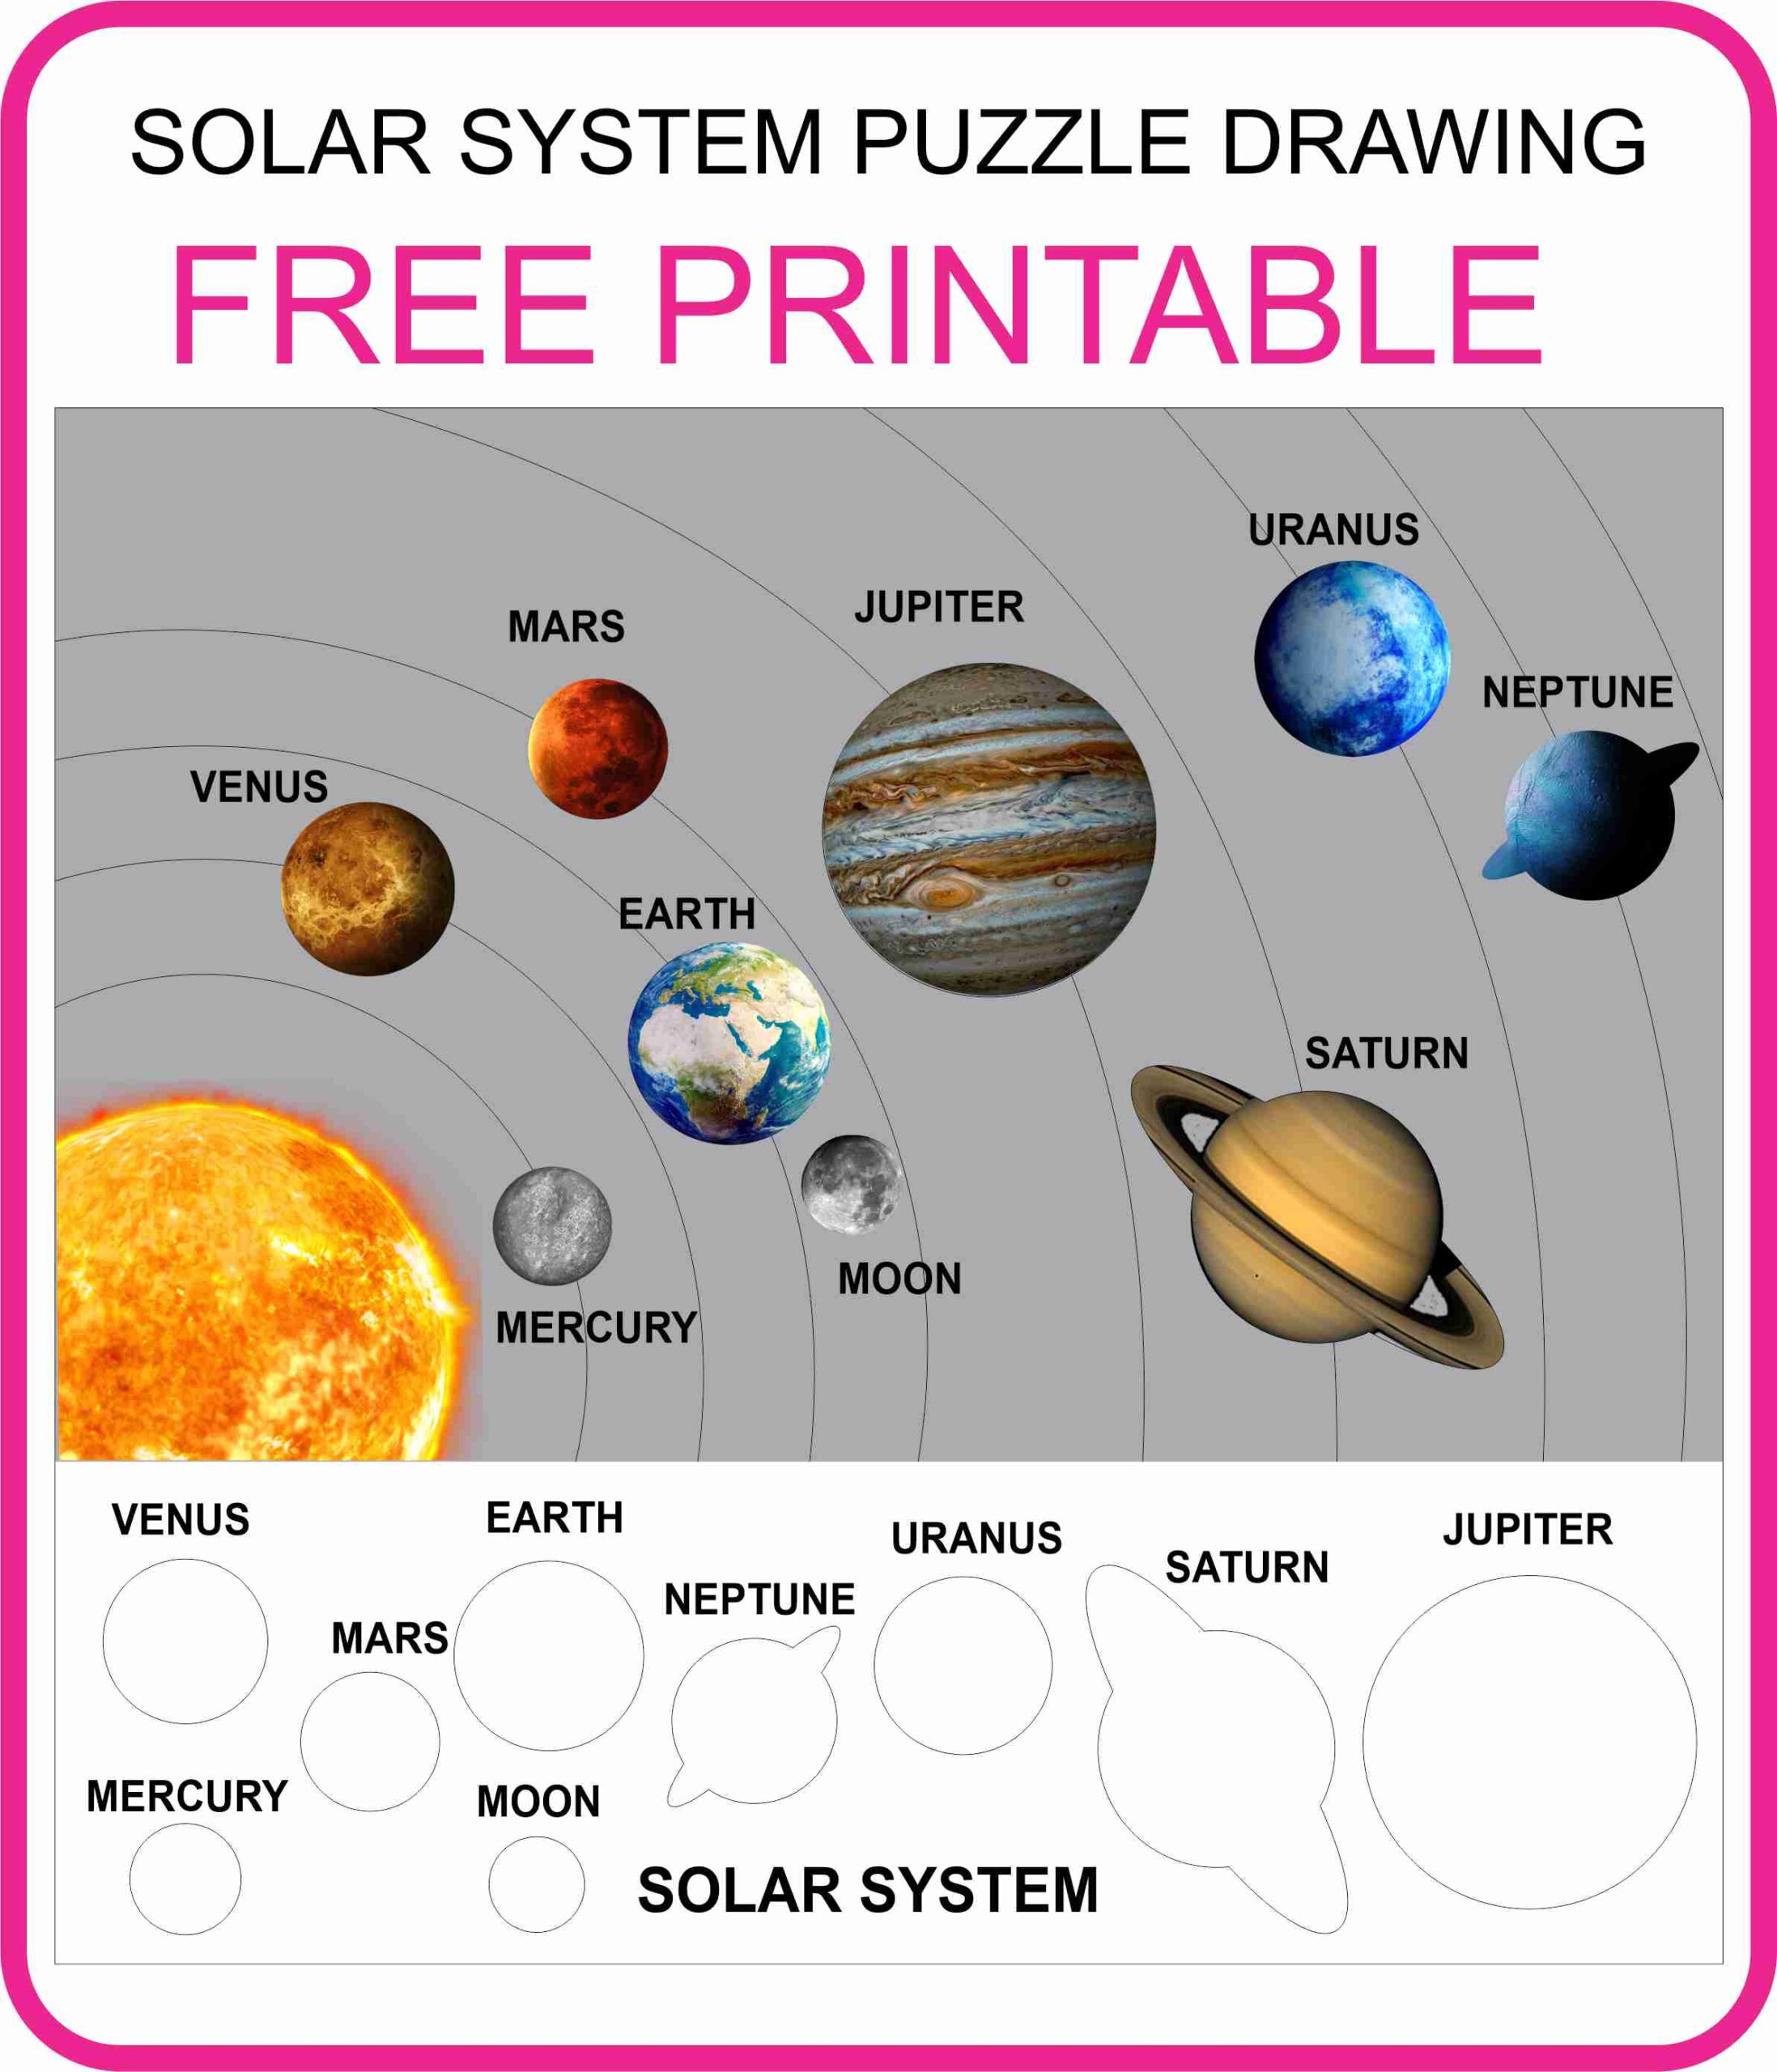 Solar System Drawing - How To Draw The Solar System Step By Step